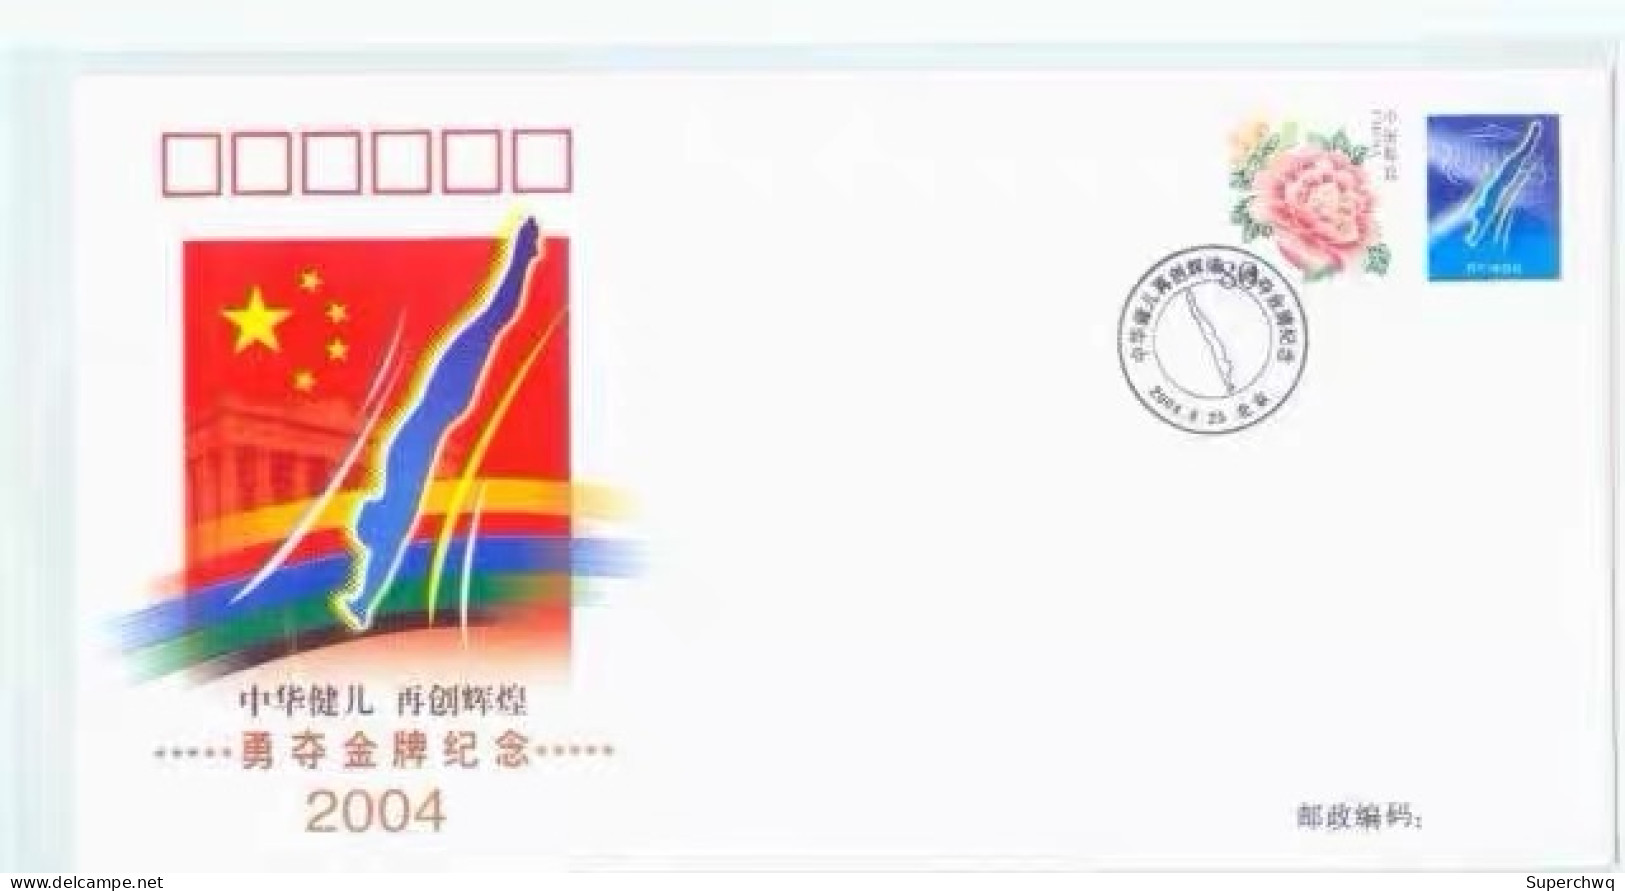 China cover,The Chinese delegation won the gold medal at the 2004 Athens Olympics，32 covers